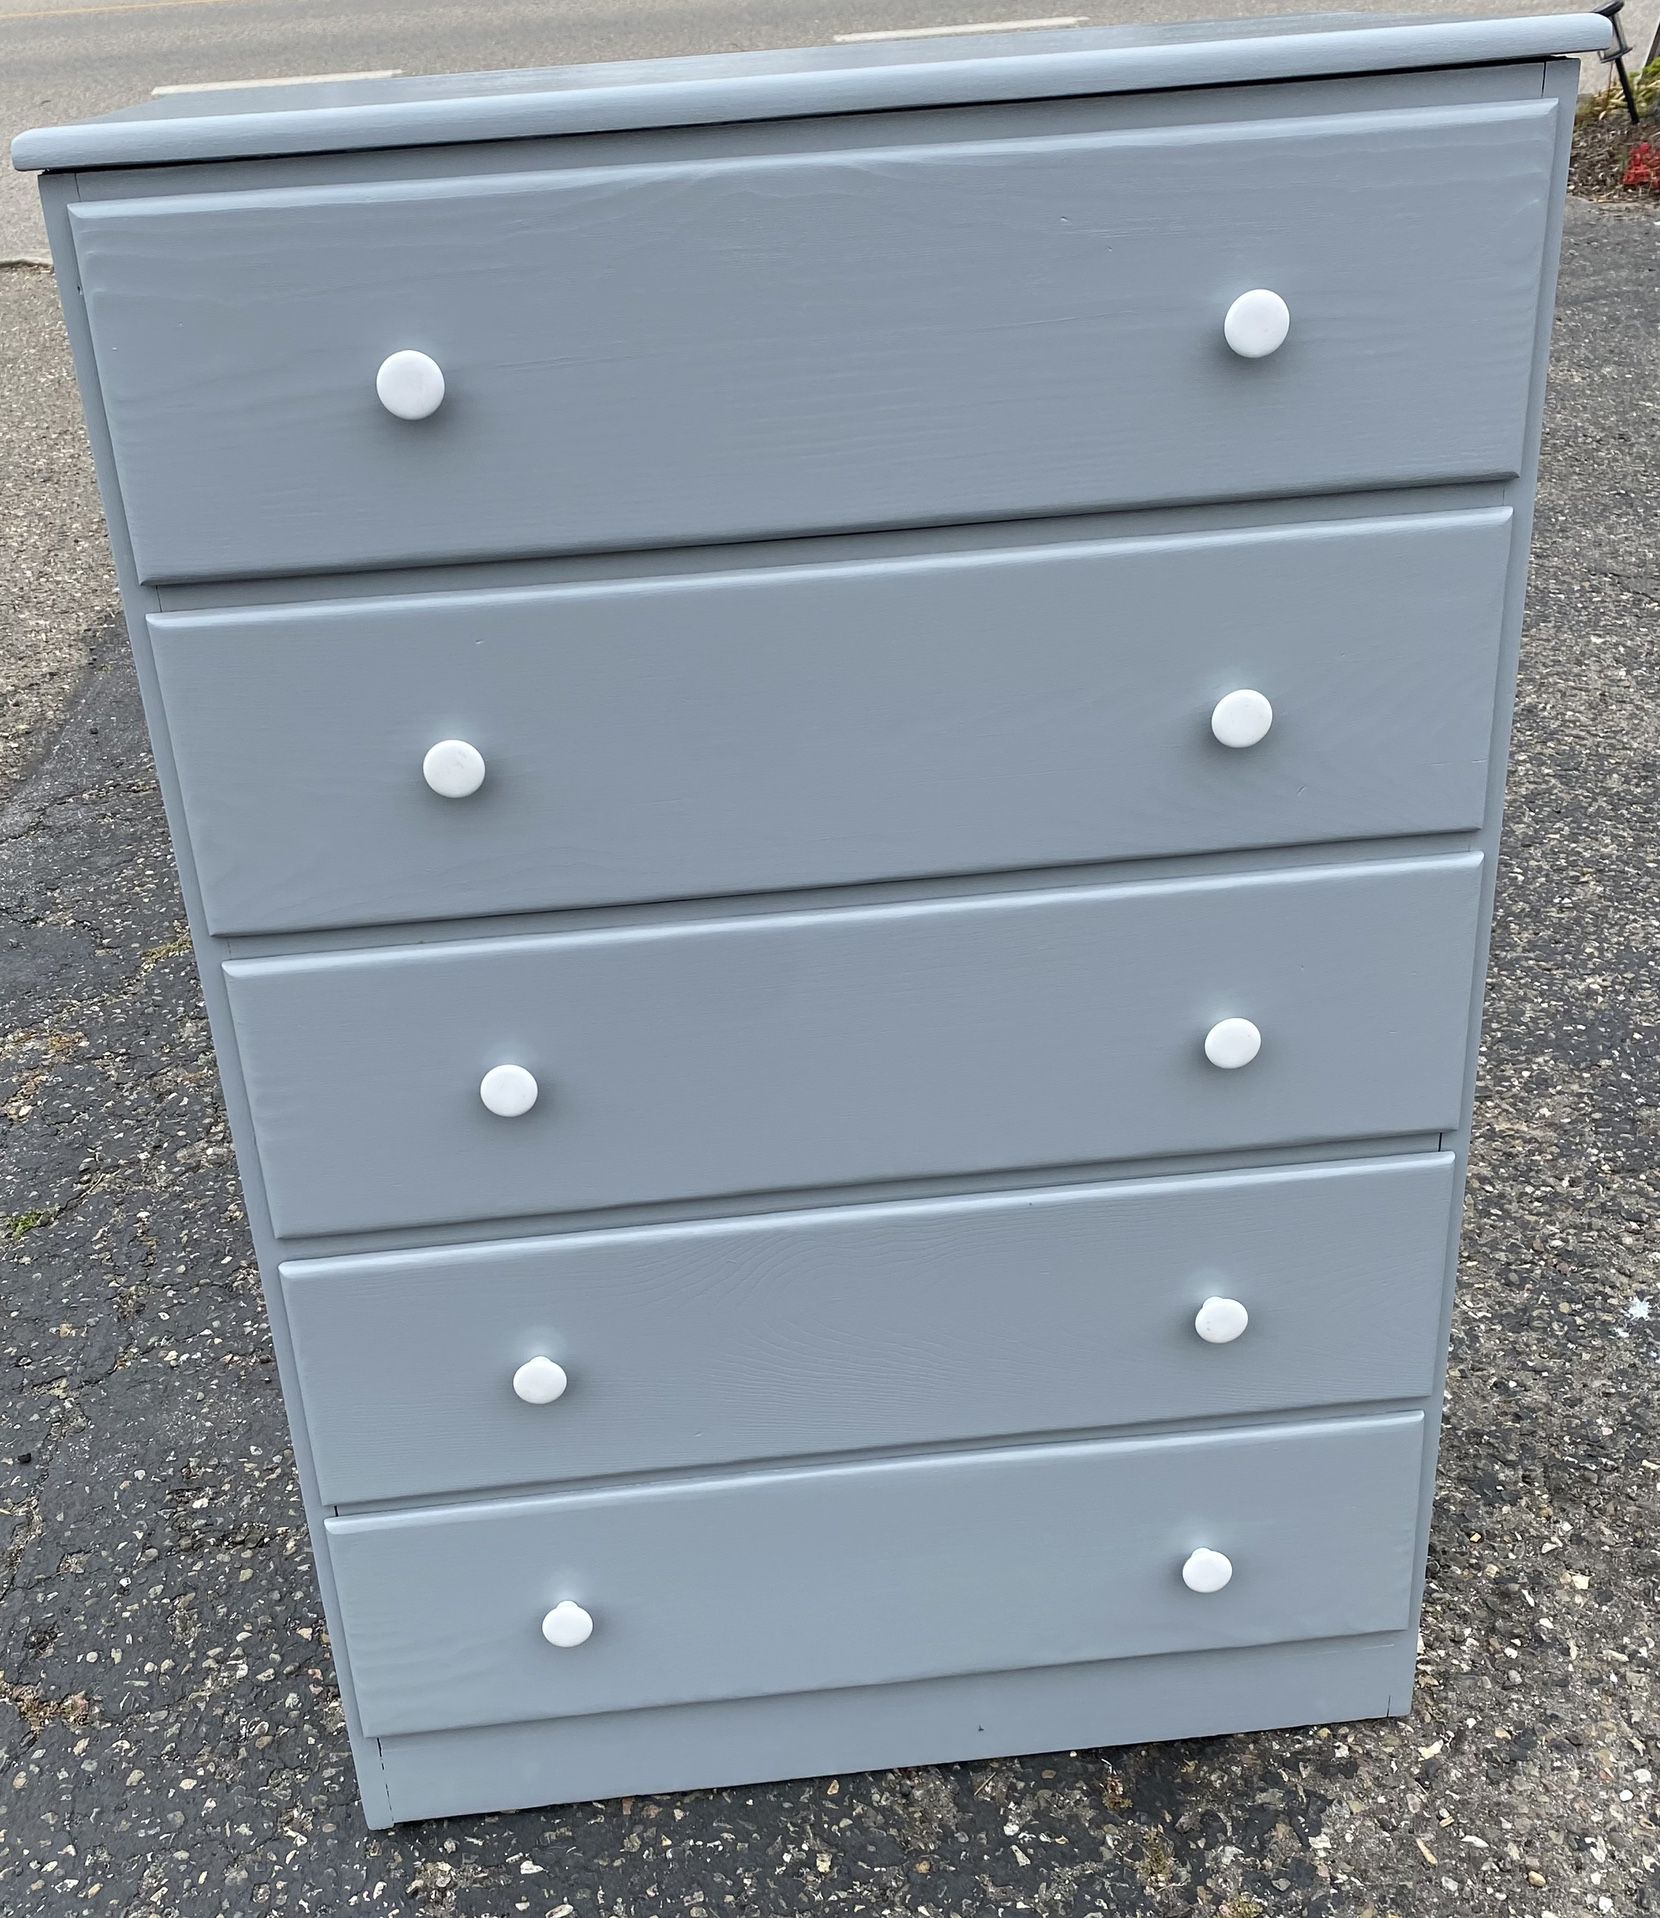 Dresser light gray vertical  Five drawers I’ll slide very nicely. They all have white ceramic knobs.  #7140 Dressers made out of solid pine for the mo